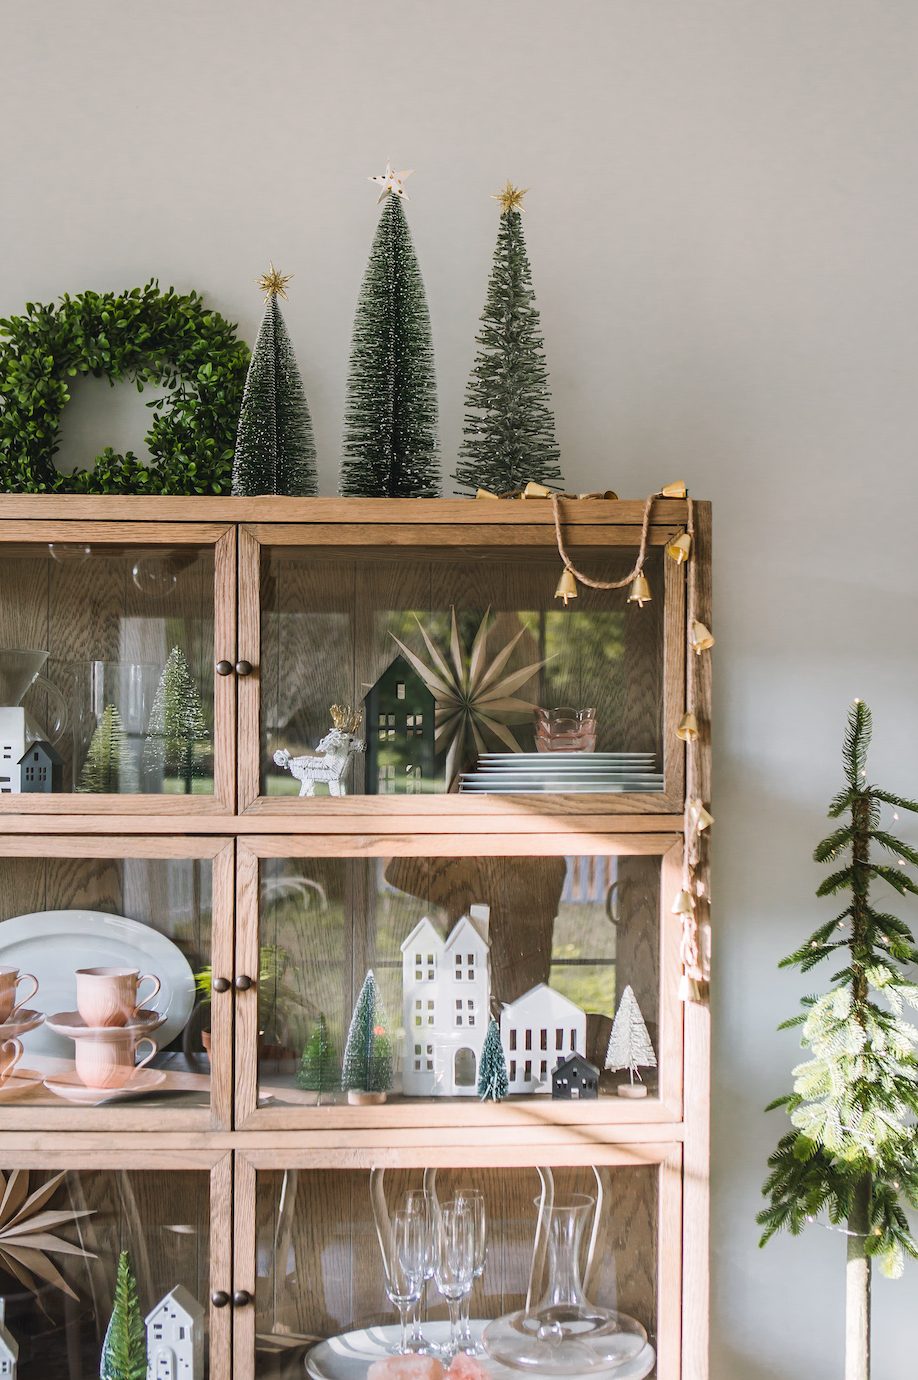 4 Minimalist Holiday Decorating Ideas, All Borrowed from Nature